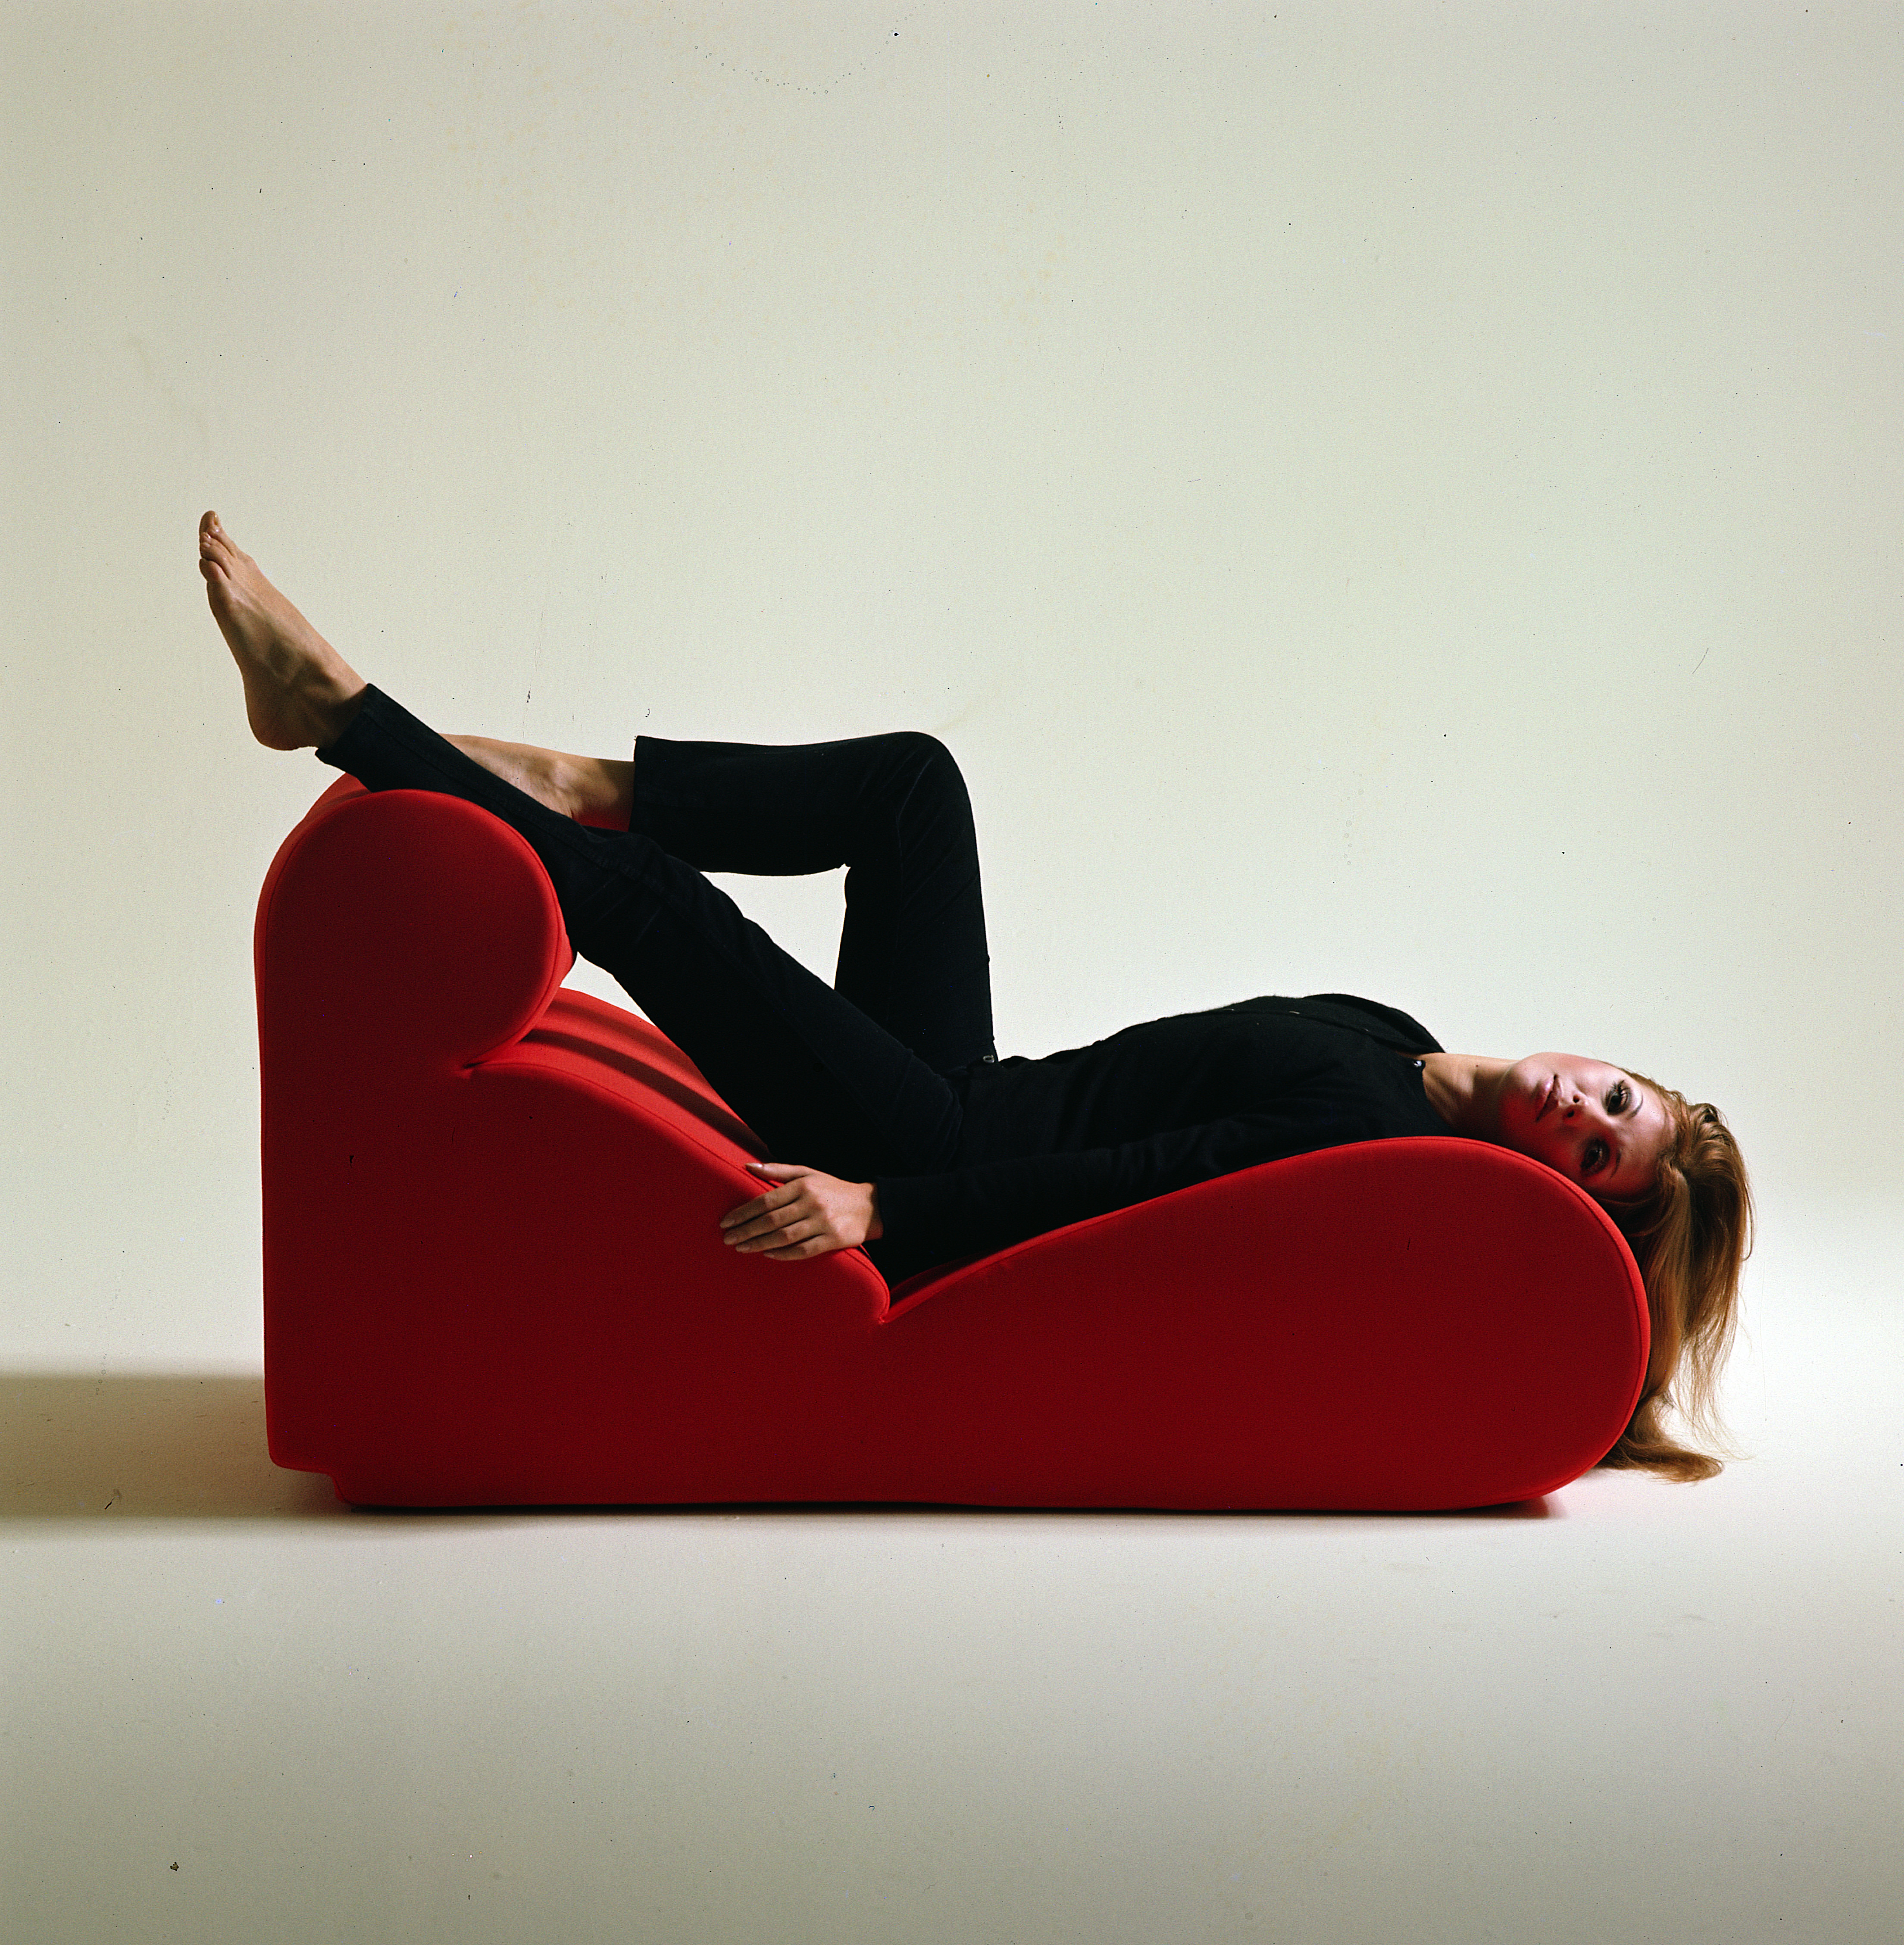 The Bobo sofa designed by Cini Boeri for Arflex was one of Boeri's first designs for the group that expanded the notion of flexibility in the home. Photo c/o Arflex. 